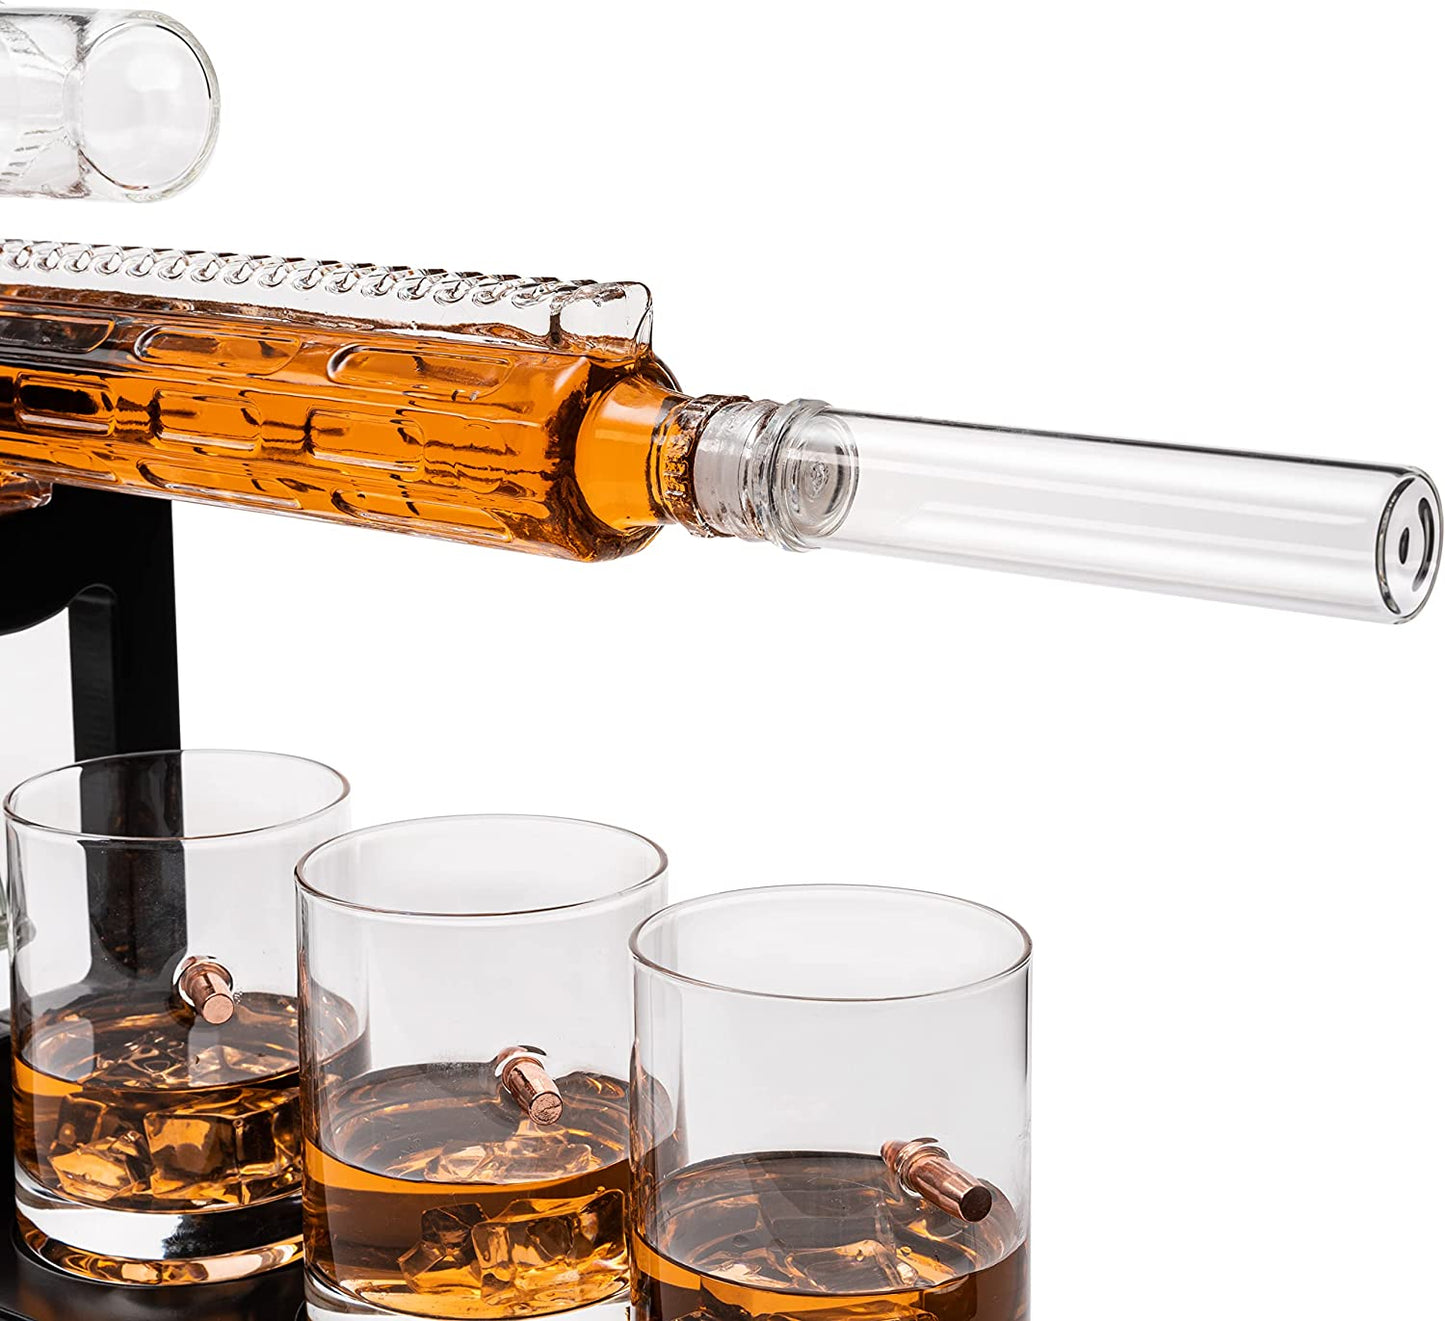 AR15 Whiskey Decanter Set - Limited Edition with Silencer Stopper - 640ml & 4 310 mL Bullet Glasses - Unique Gift - Drinking Party Accessory, Handmade Sniper Gun Liquor Decanter, Tik Tok Gun Decanter-5